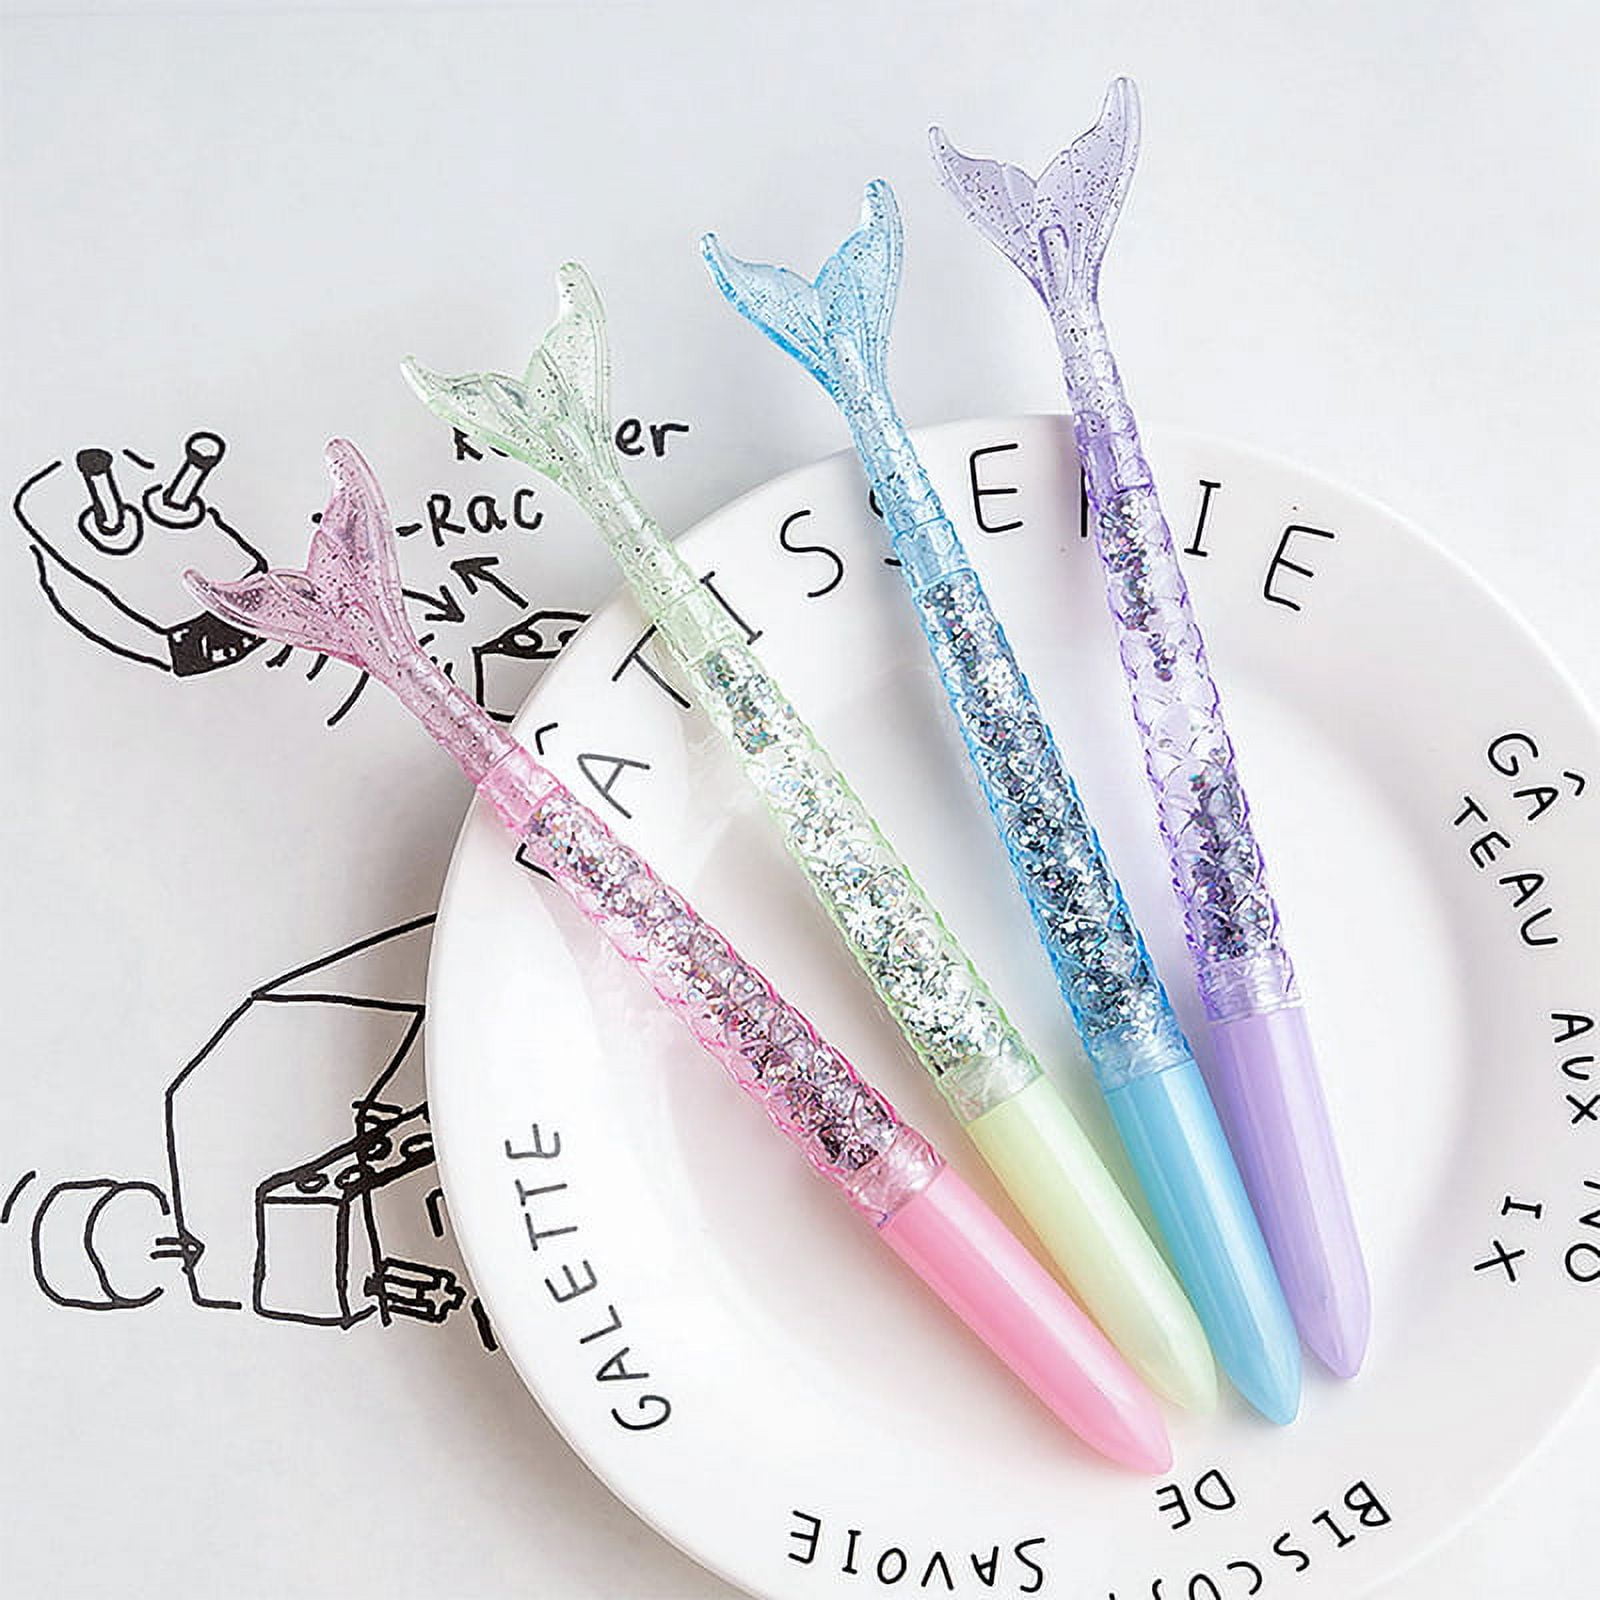 Wholesale Mermaid Tail Glitter Ballpoint Pen Fashionable Novel Office Gift  And School Supply For Students From Esw_house, $0.75